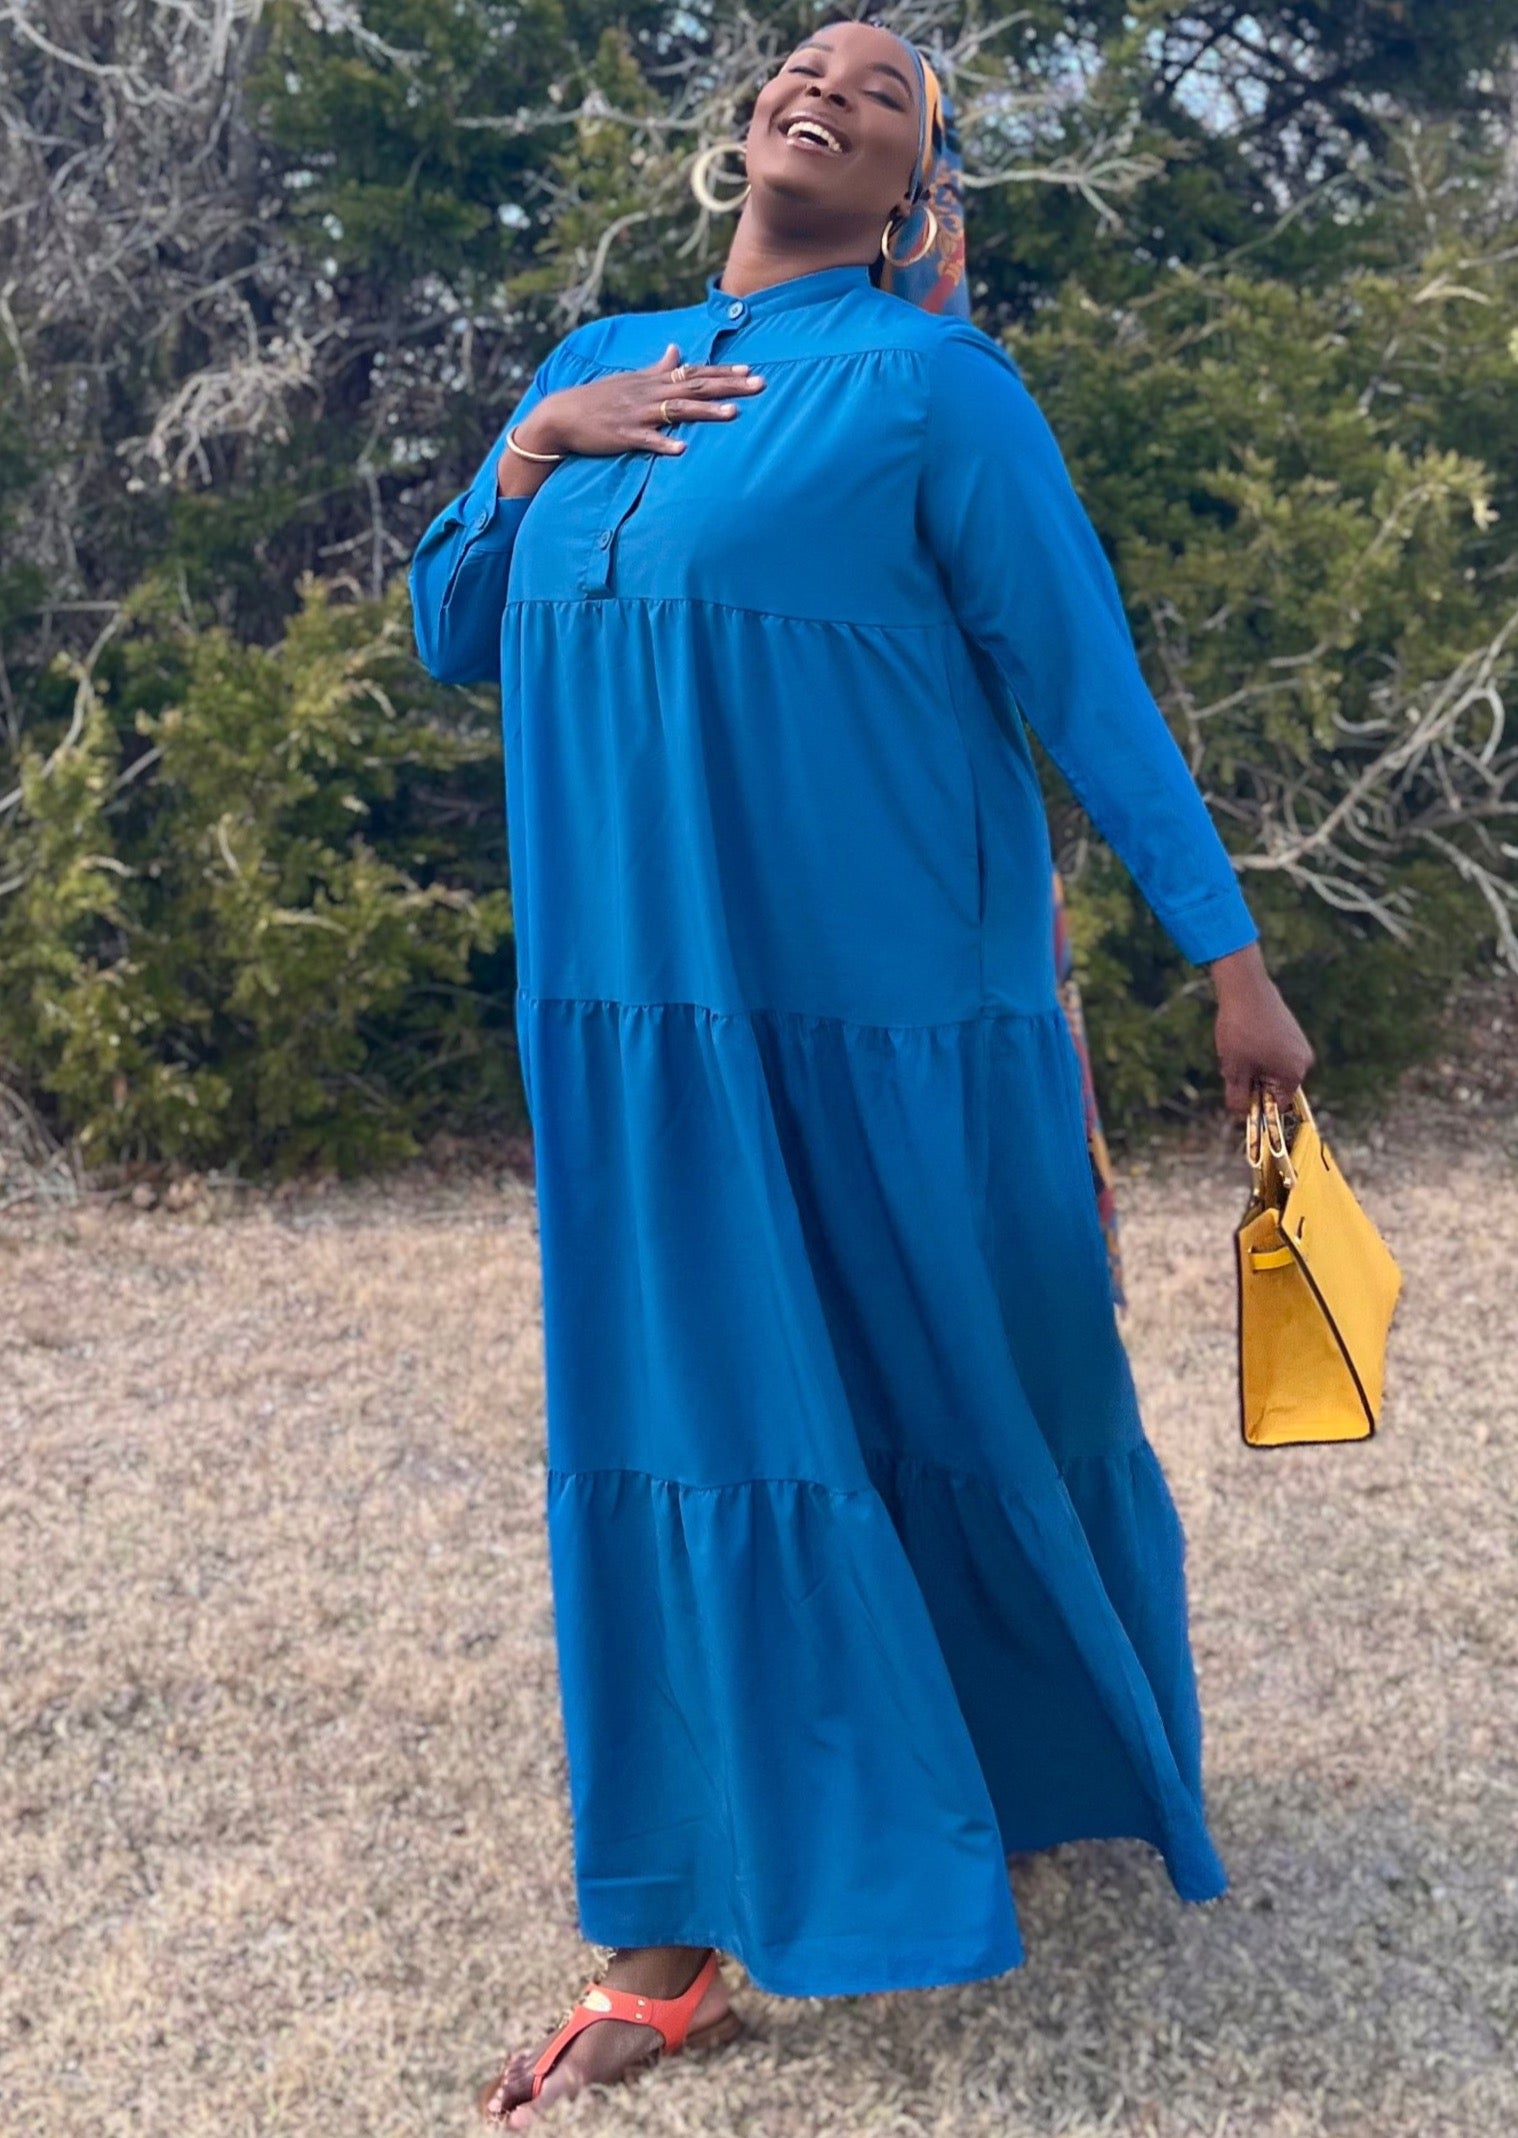 død Minearbejder Afstemning Plus Size Modest Dresses | Styled by Zubaidah